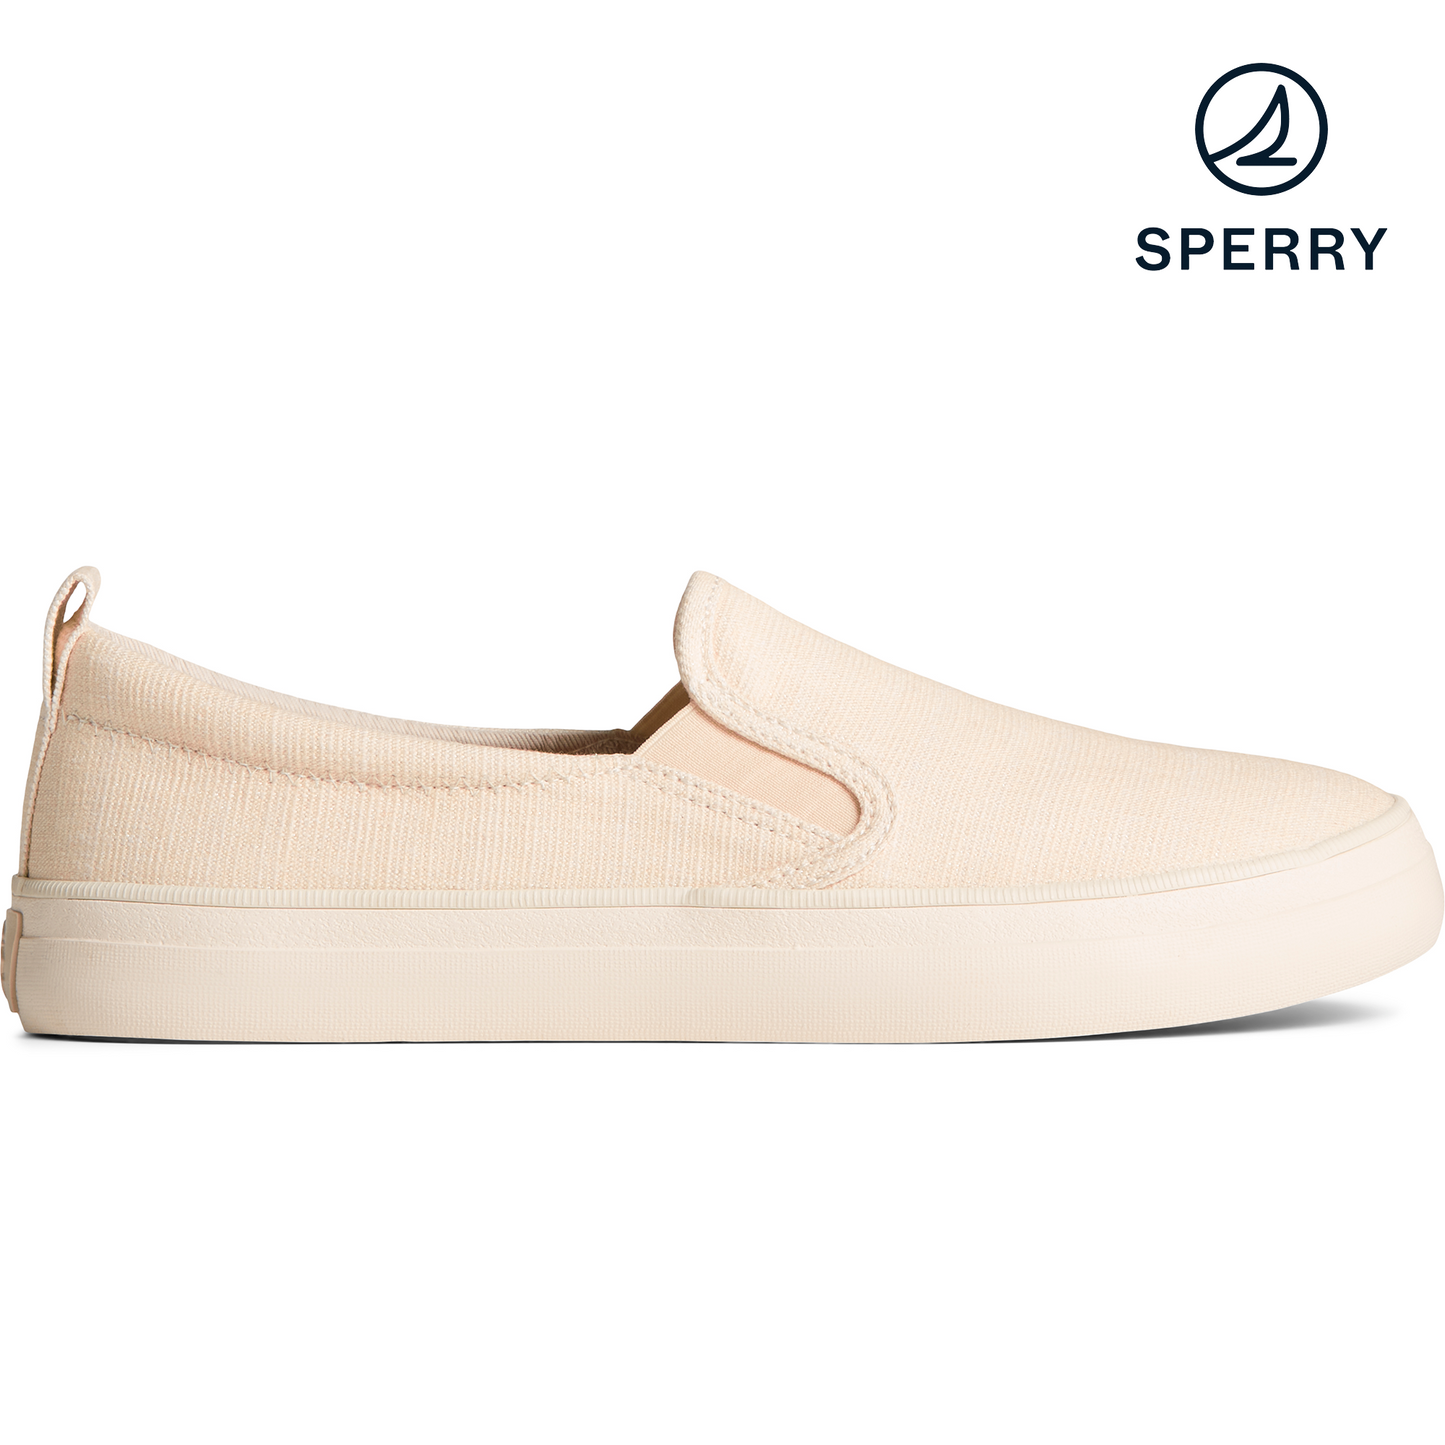 Sperry Women's Crest Twin Gore Shimmer Slip On Sneaker - Off White (STS88459)